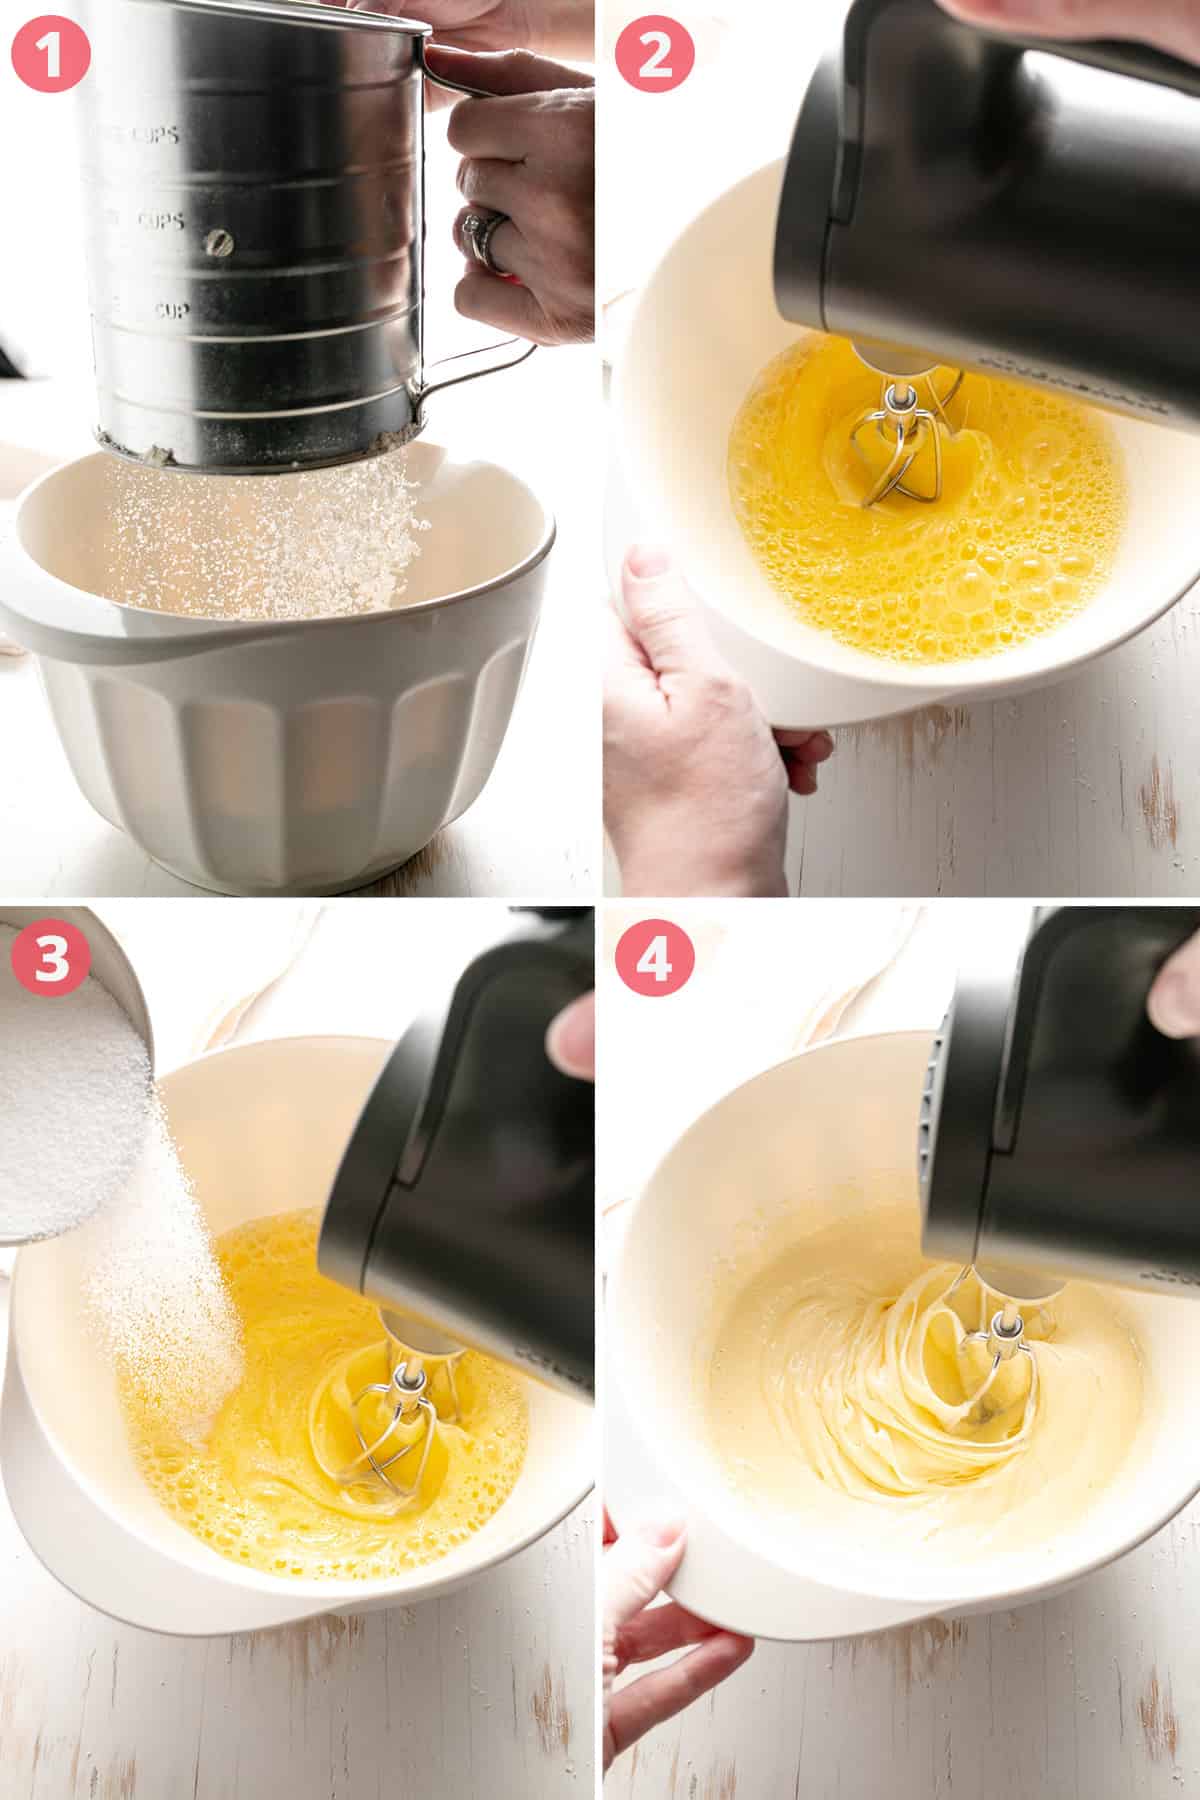 The composite image shows sifted flour in a bowl, whisking eggs until foamy, sugar in eggs, whisking until thickened and light in color.